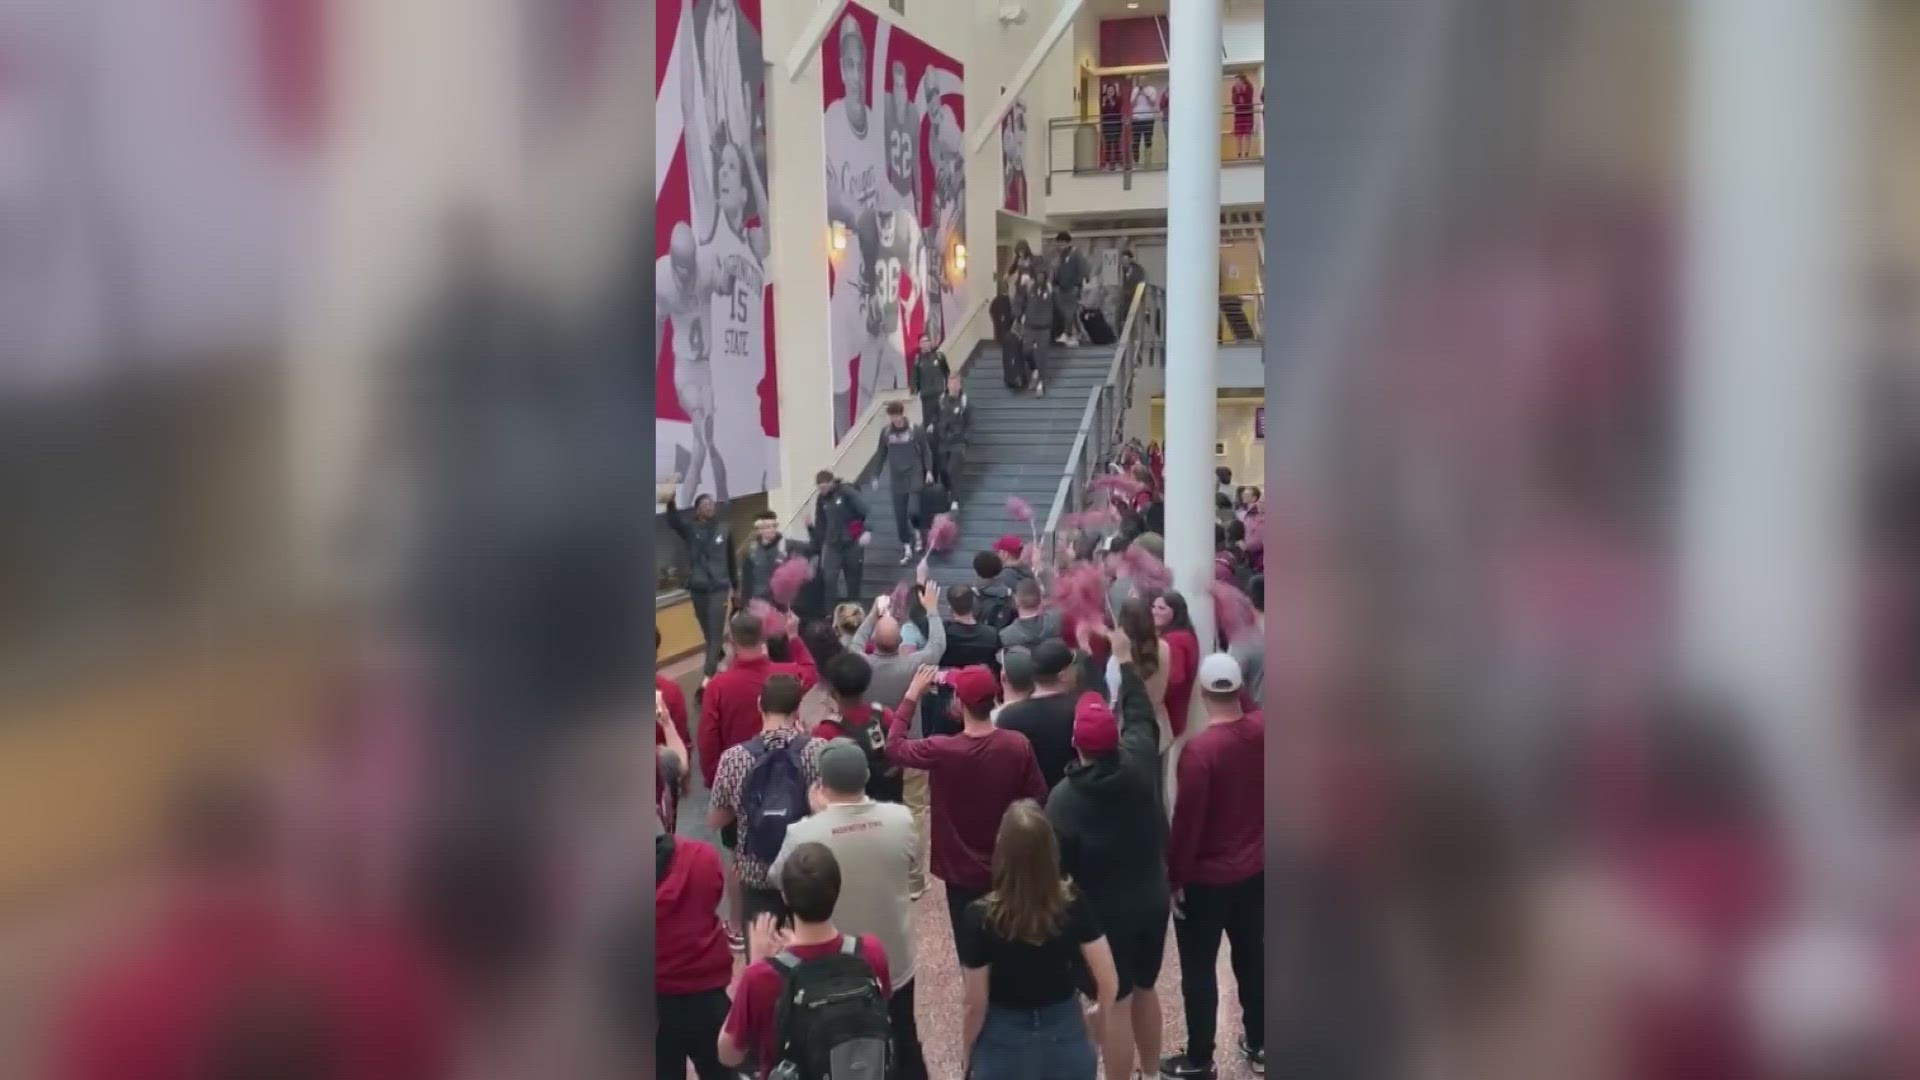 The Cougs got a loud and proud send-off to Omaha for its first NCAA Tournament game in more than 15 years.